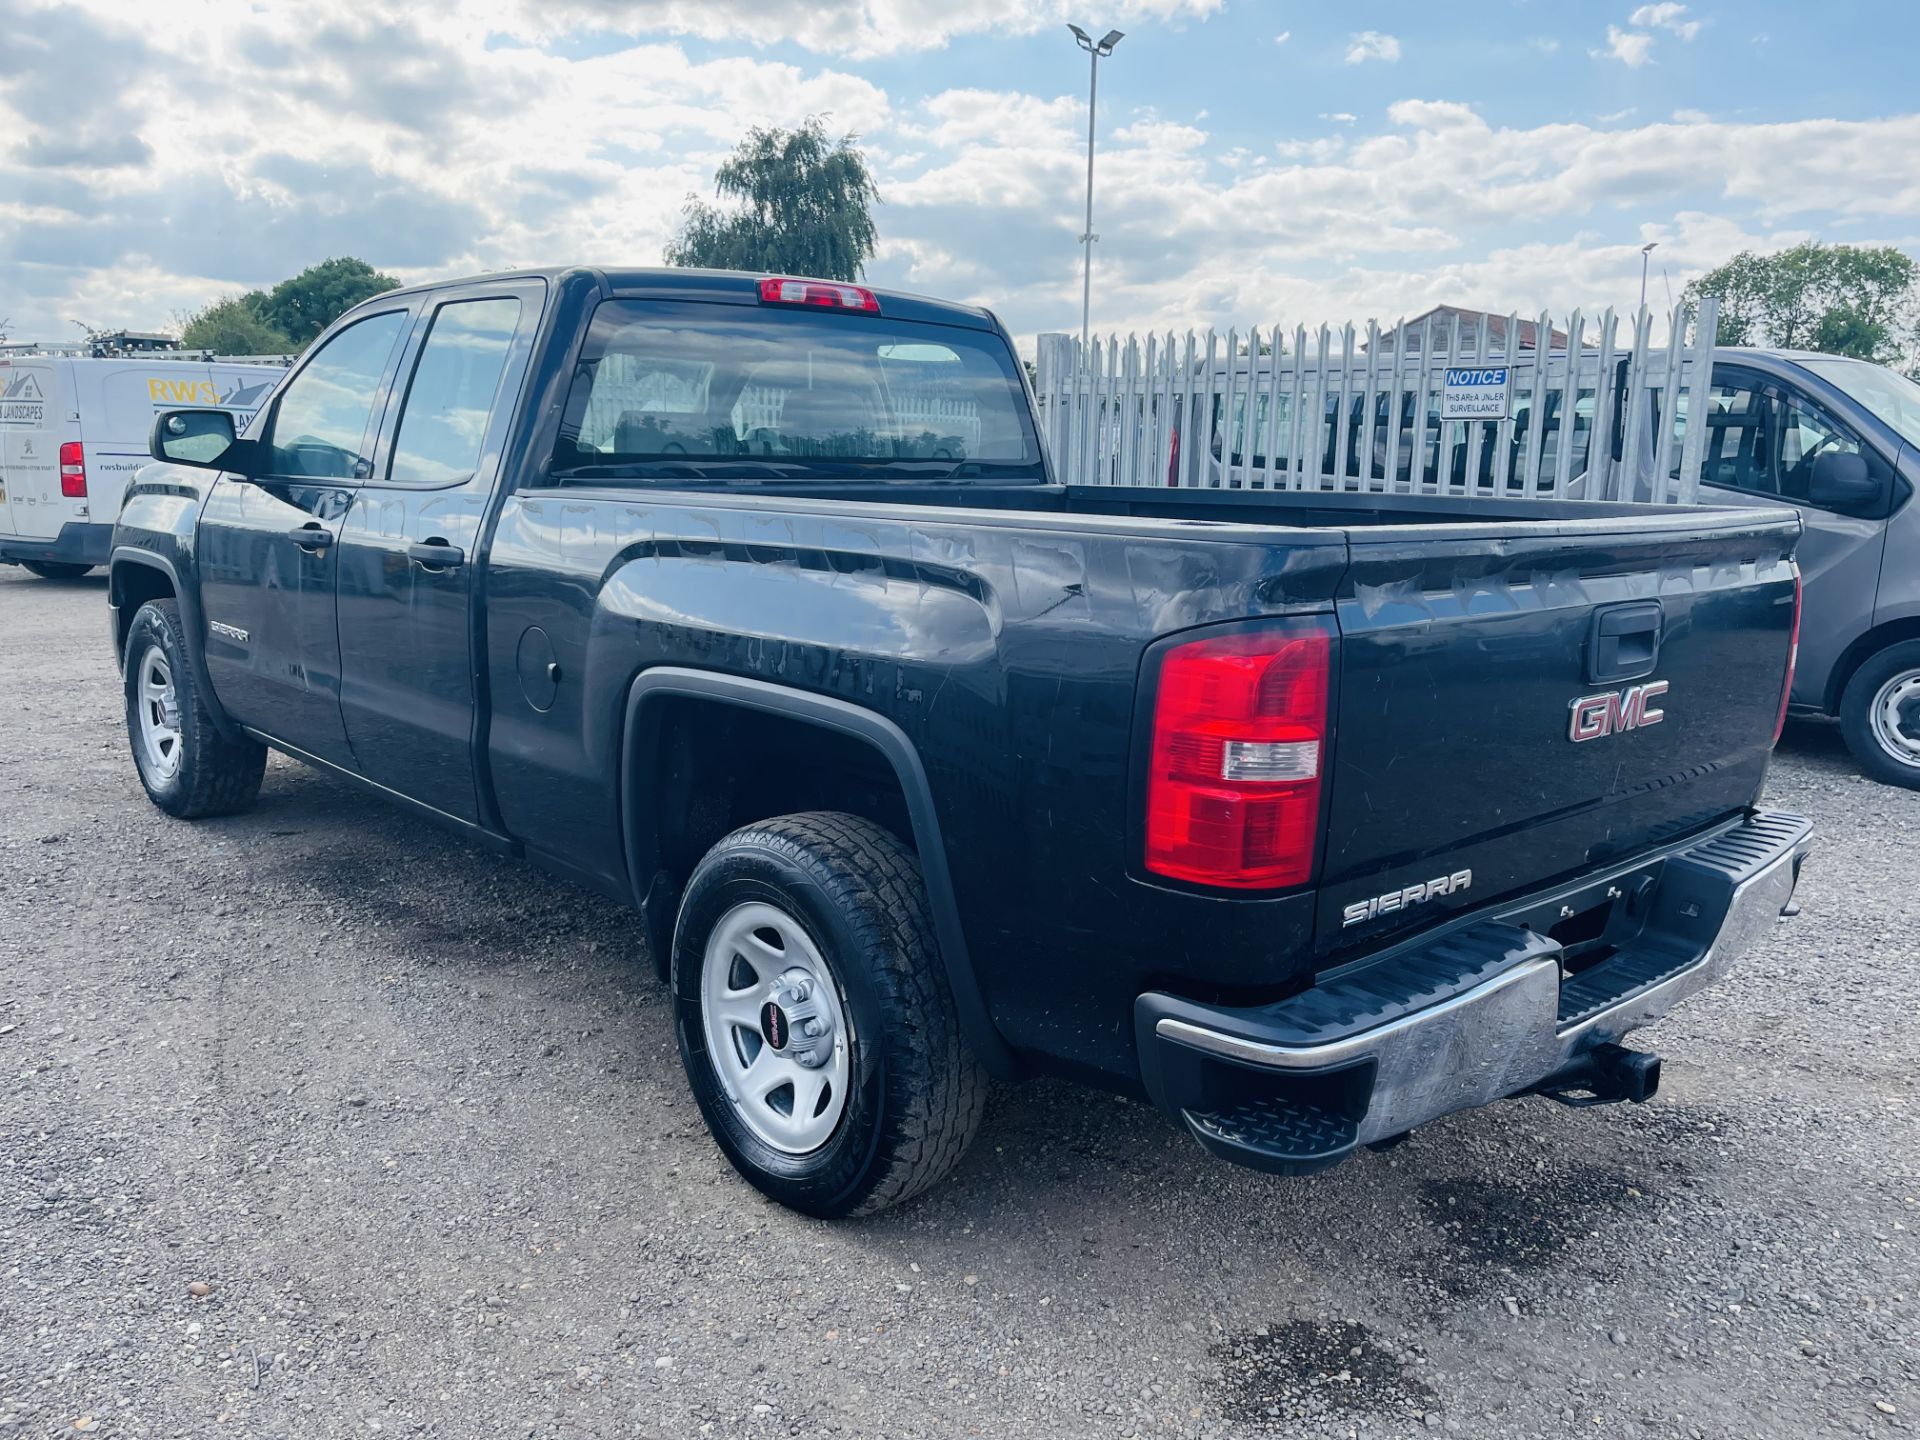 ** ON SALE ** GMC Sierra 4.3L V6 1500 Double-Cab 2014 '2014 Year' 6 seats - Air Con - Pick-up - - Image 8 of 22